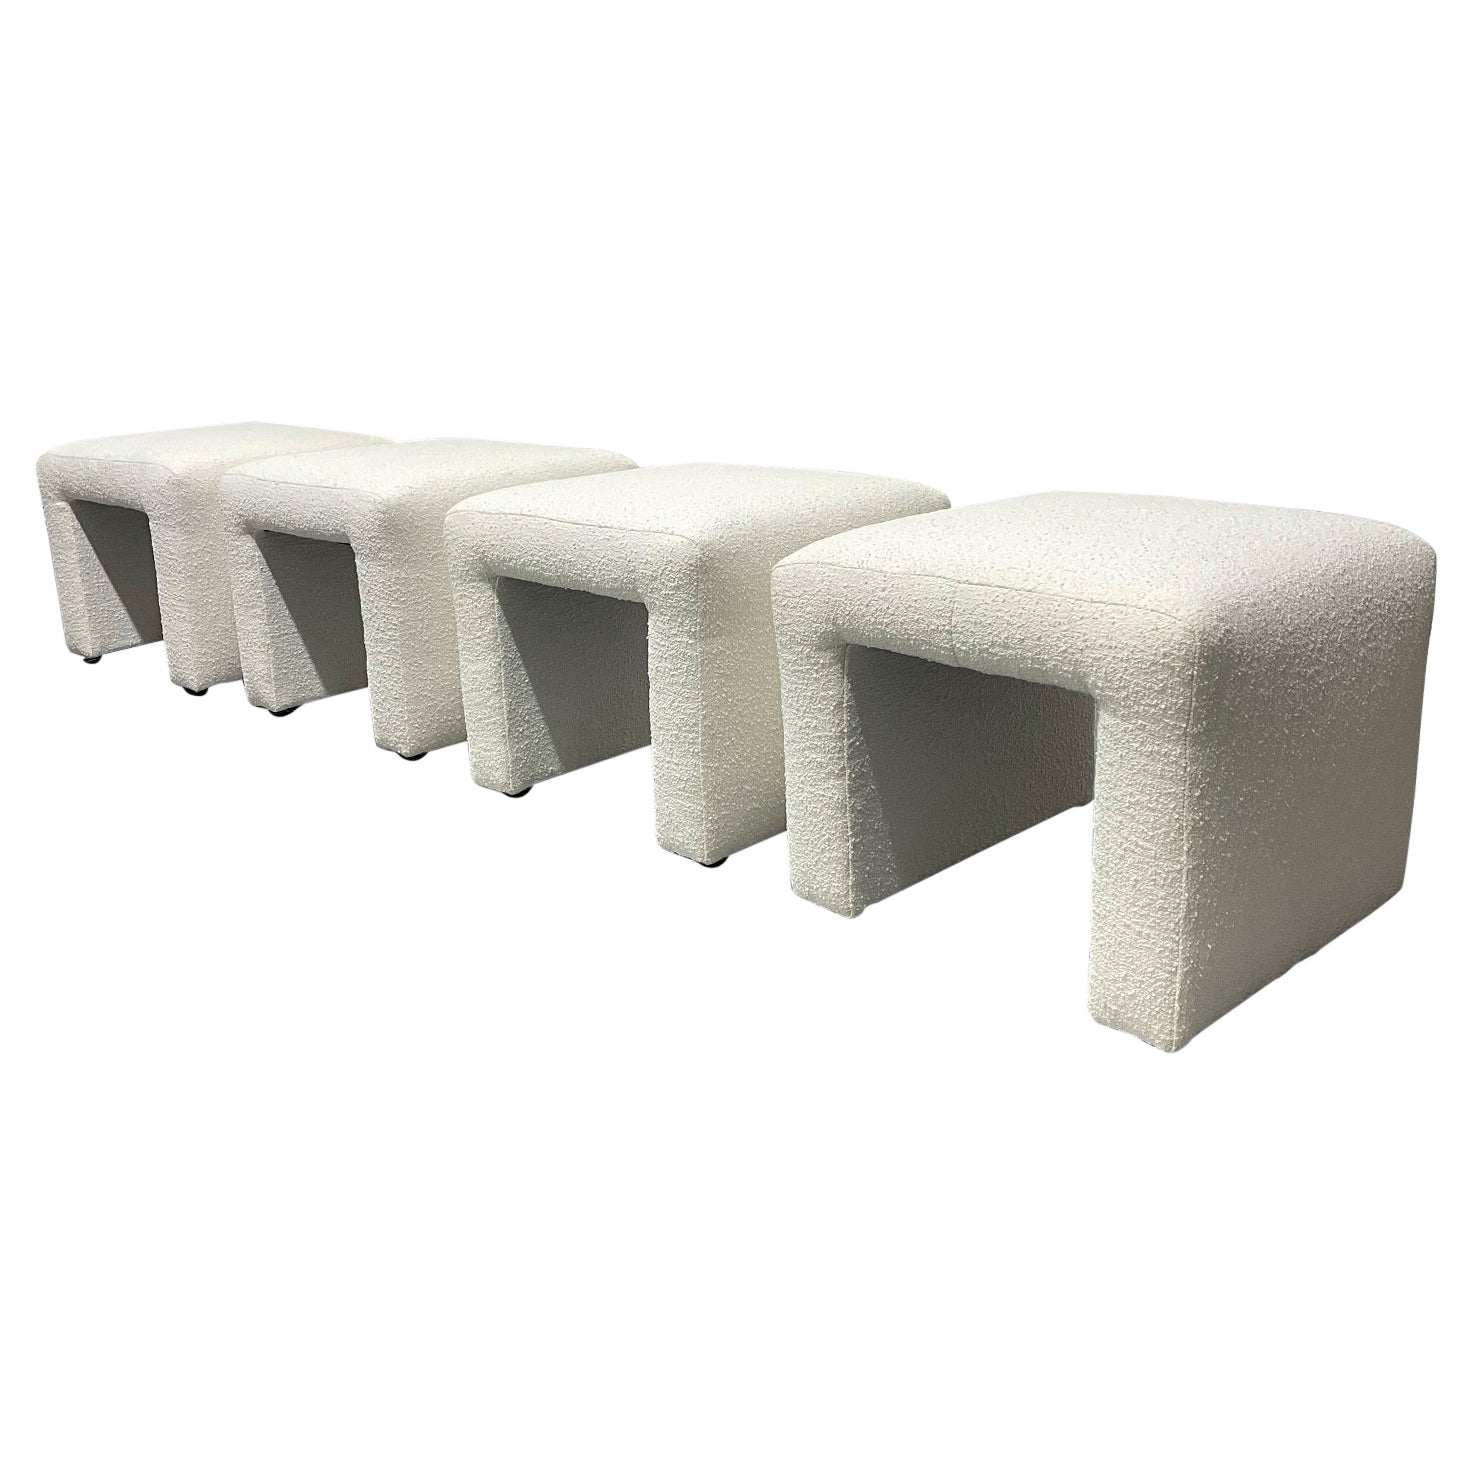 Set of 4 Mid-Century Modern Benches in Boucle For Sale